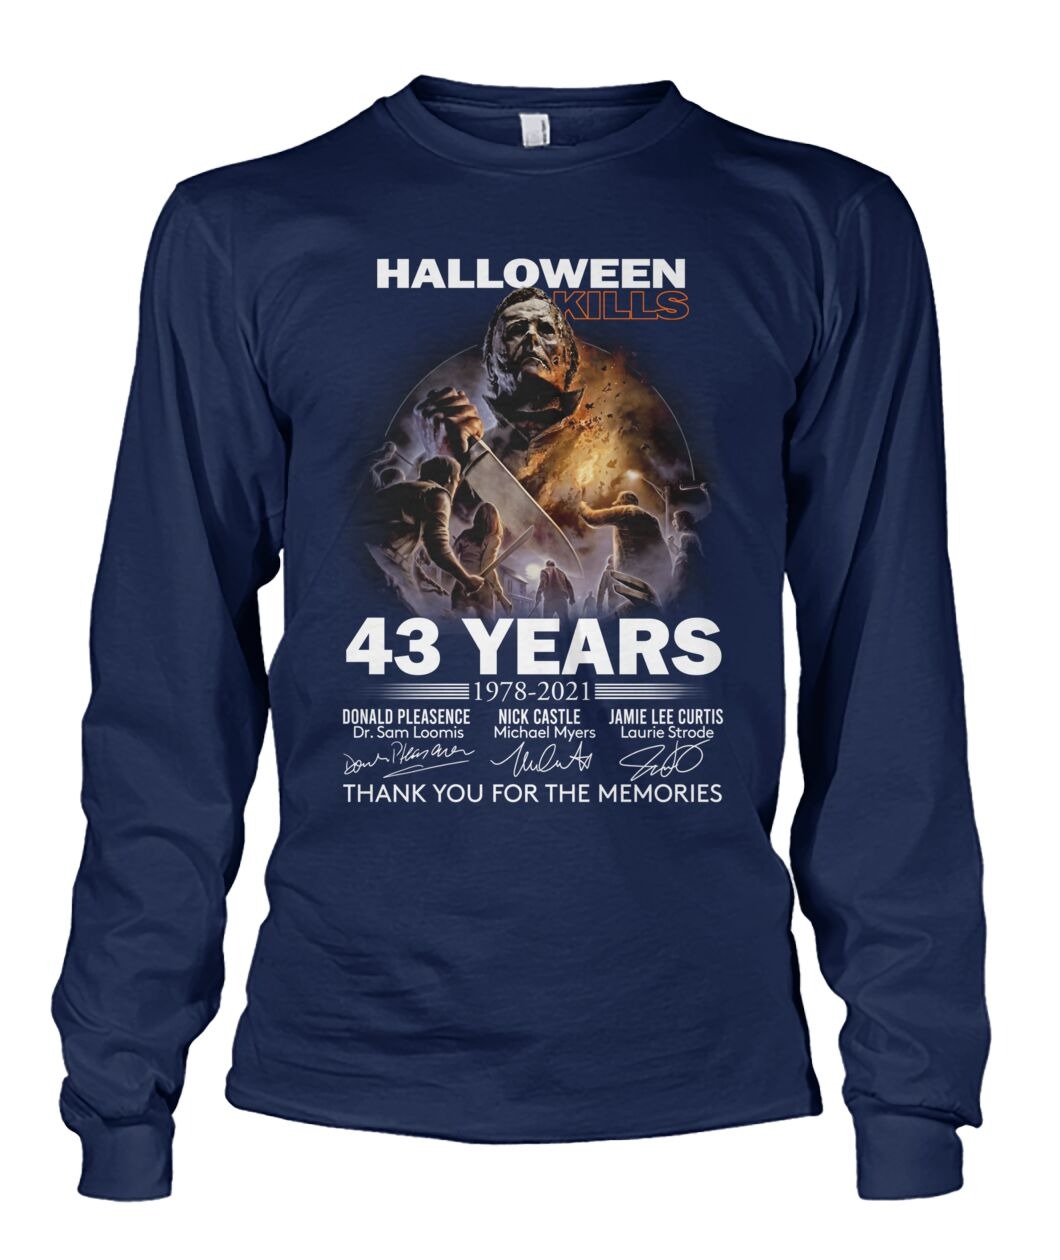 Michael myers halloween kills 43 years thank you for the memories long sleeve